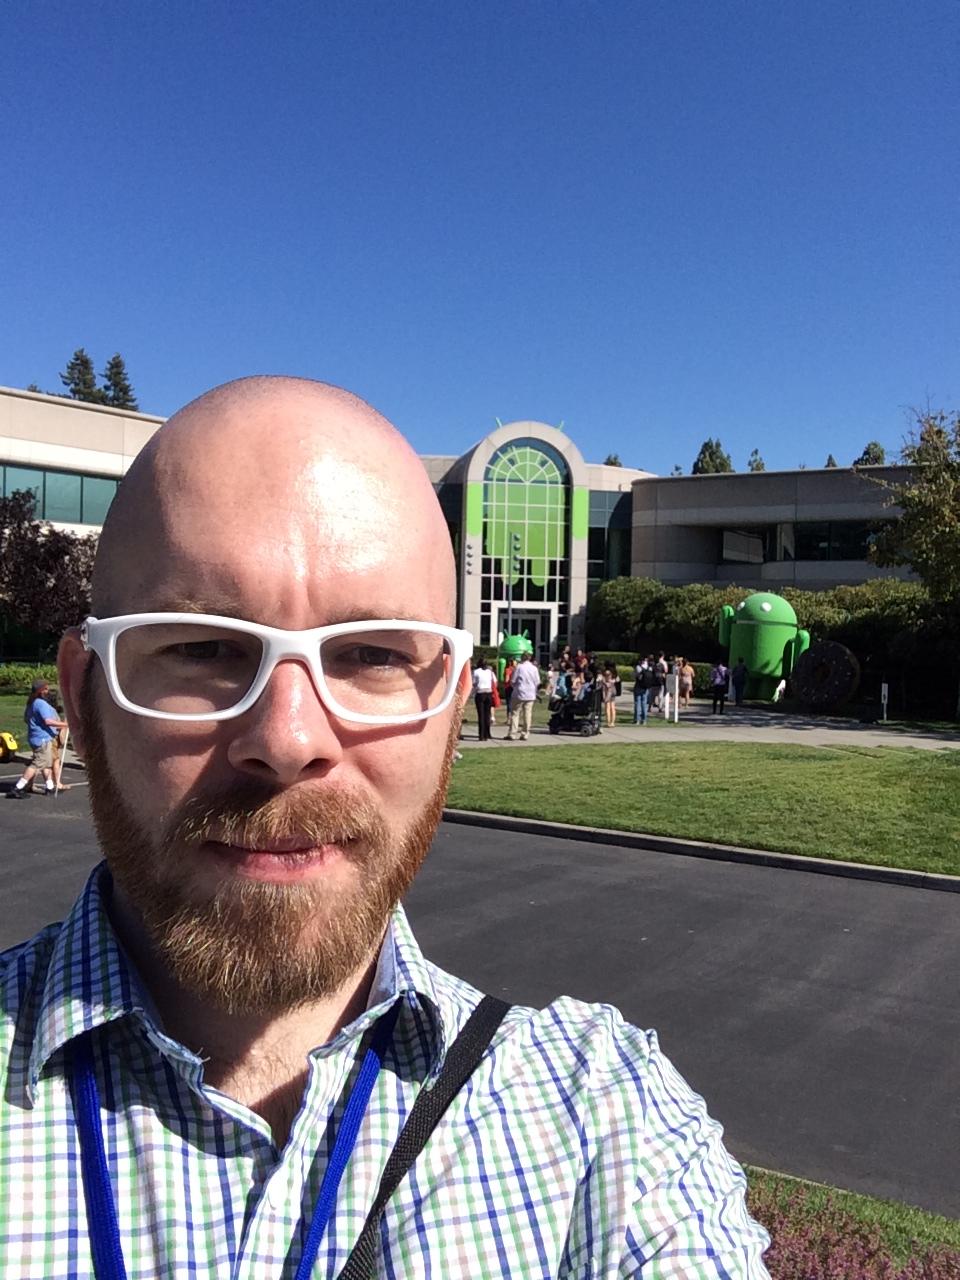 Kody Dillman was one of dozens of people to win Google scholarships and attend the Google Scholars' Retreat in Silicon Valley June 18-21.